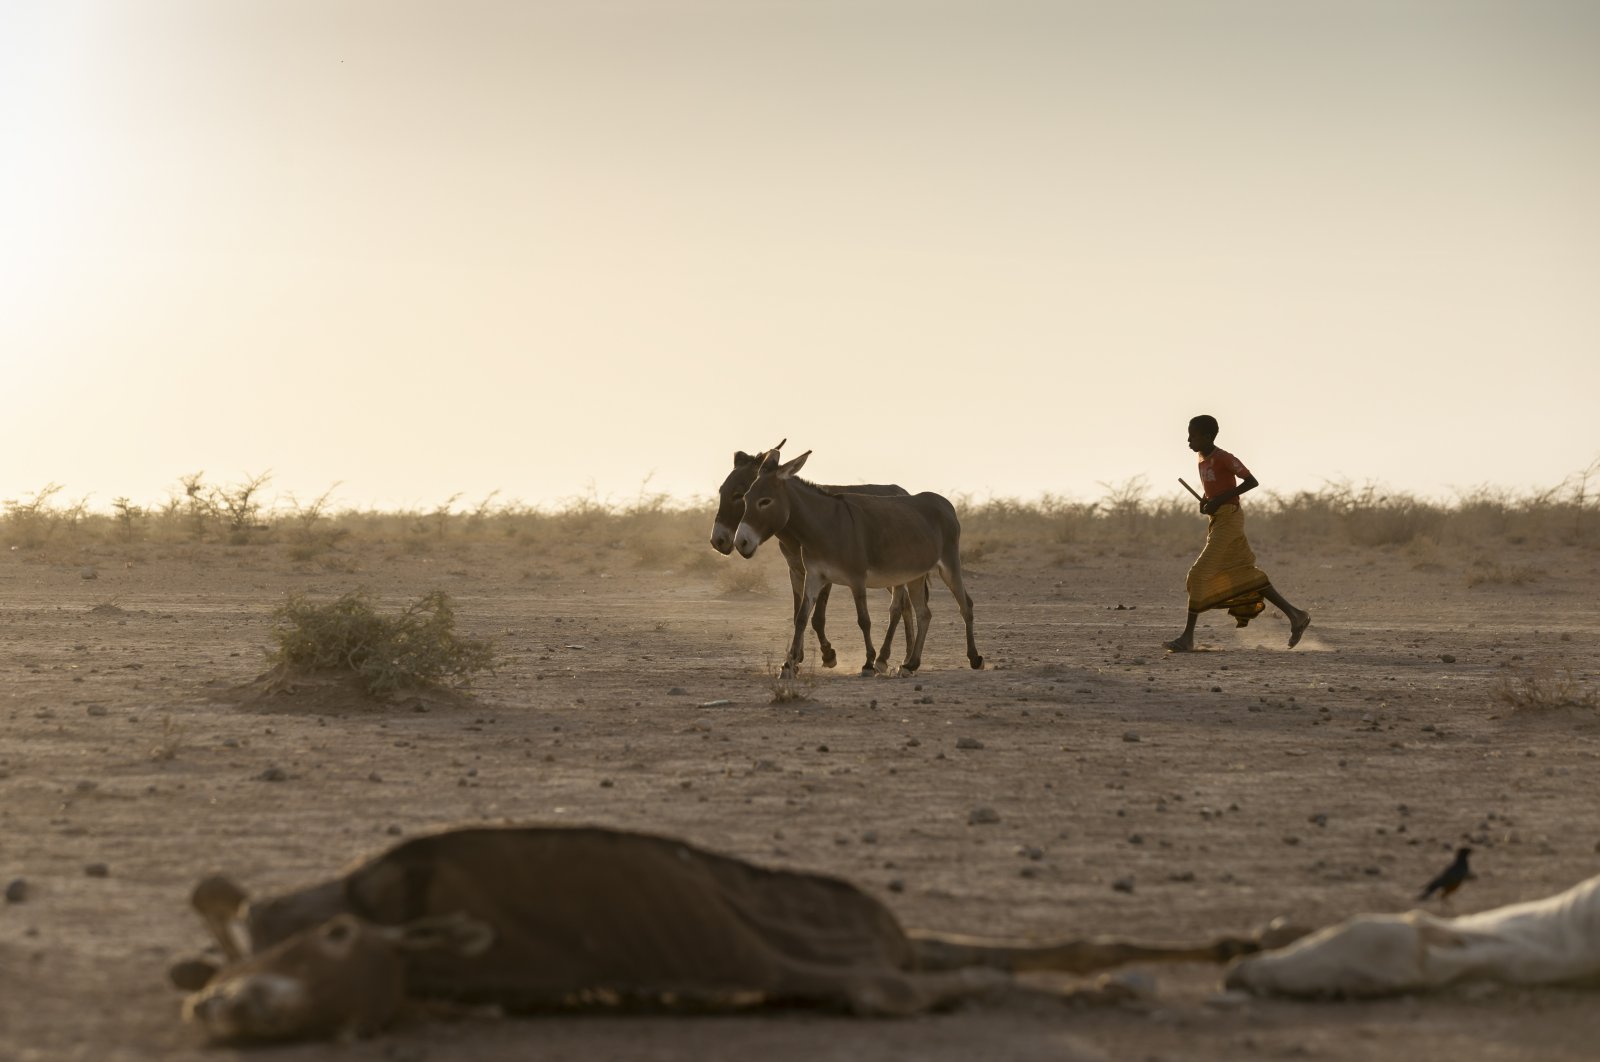 Abdurazak Mohammed, who wants to be a teacher, takes his donkeys back home at Gabi&#039;as village, where the school has been closed due to the drought and the children now care for the animals, northeast of the town of Gode, in the Shabelle zone of the Somali region of Ethiopia Friday, Jan. 21, 2022. (AP Photo)